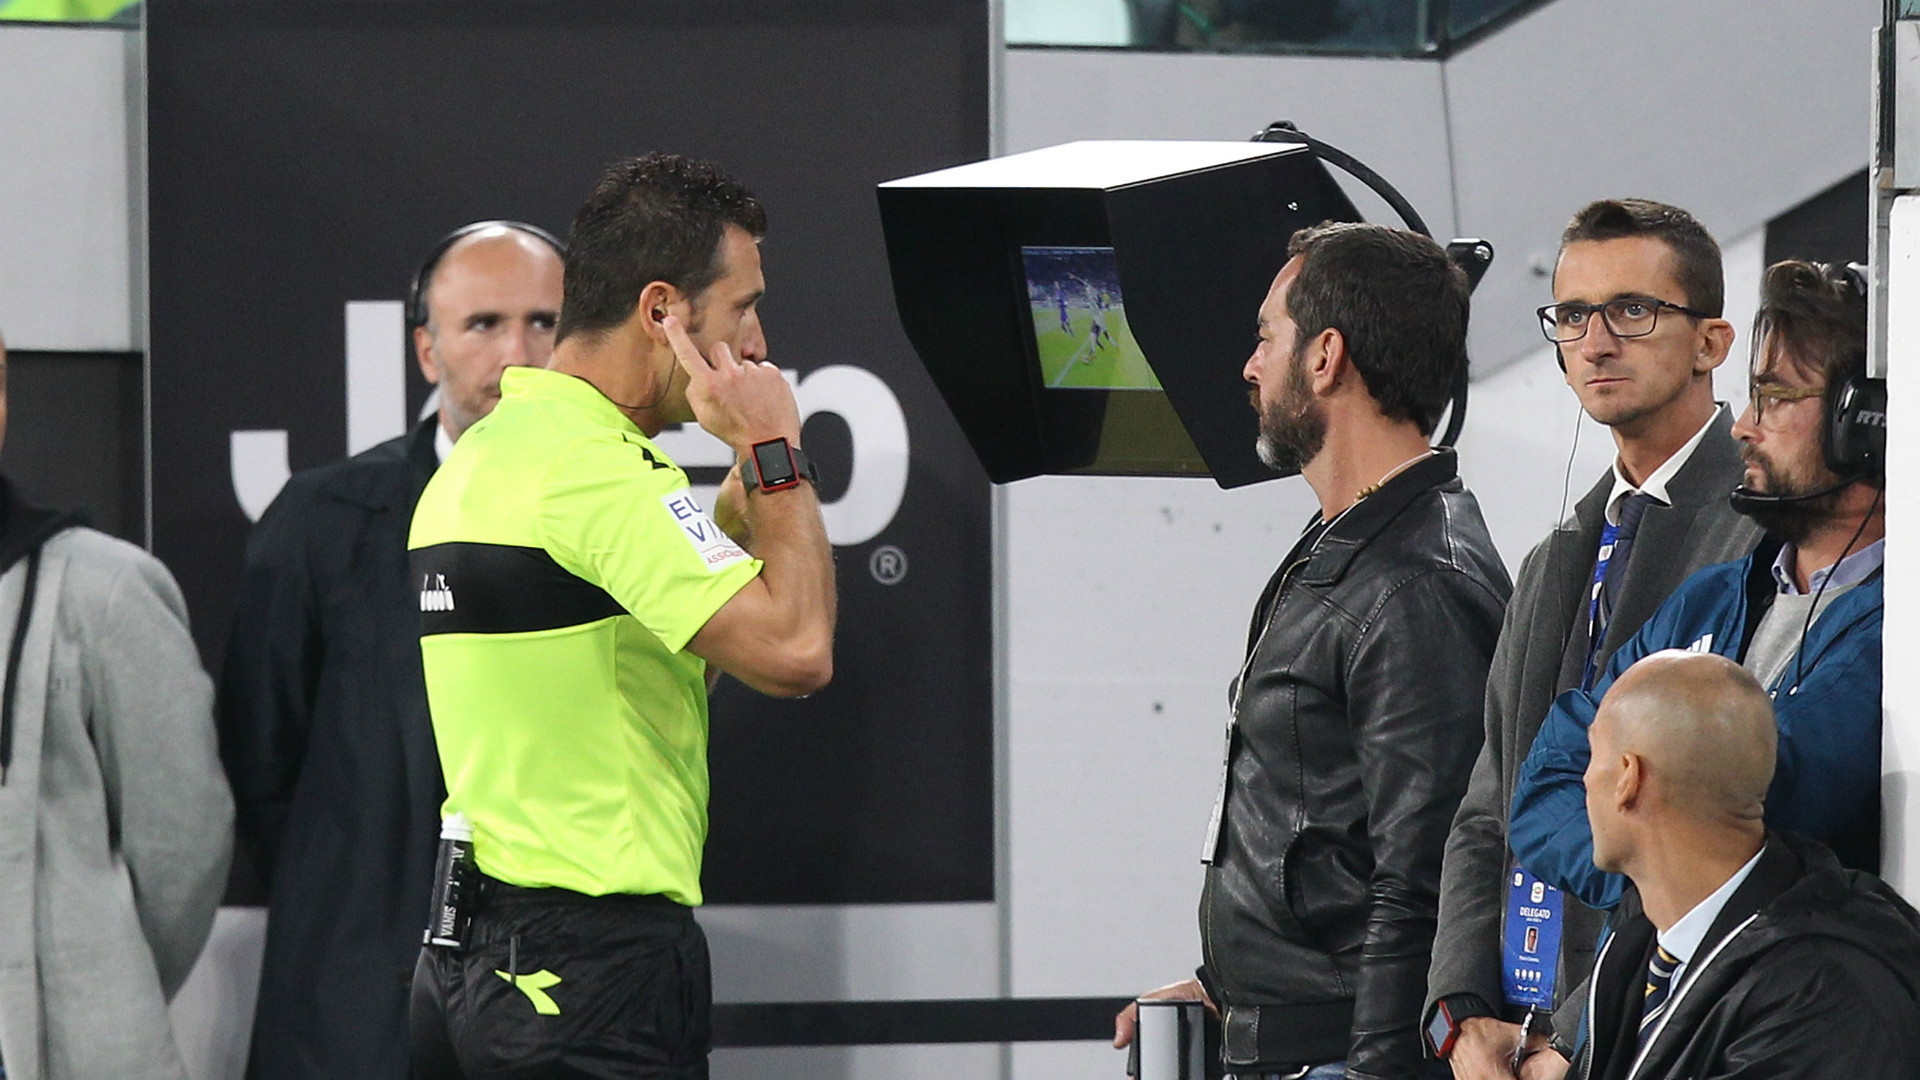 The VAR does justice and allows AC Milan's victory against Chievo